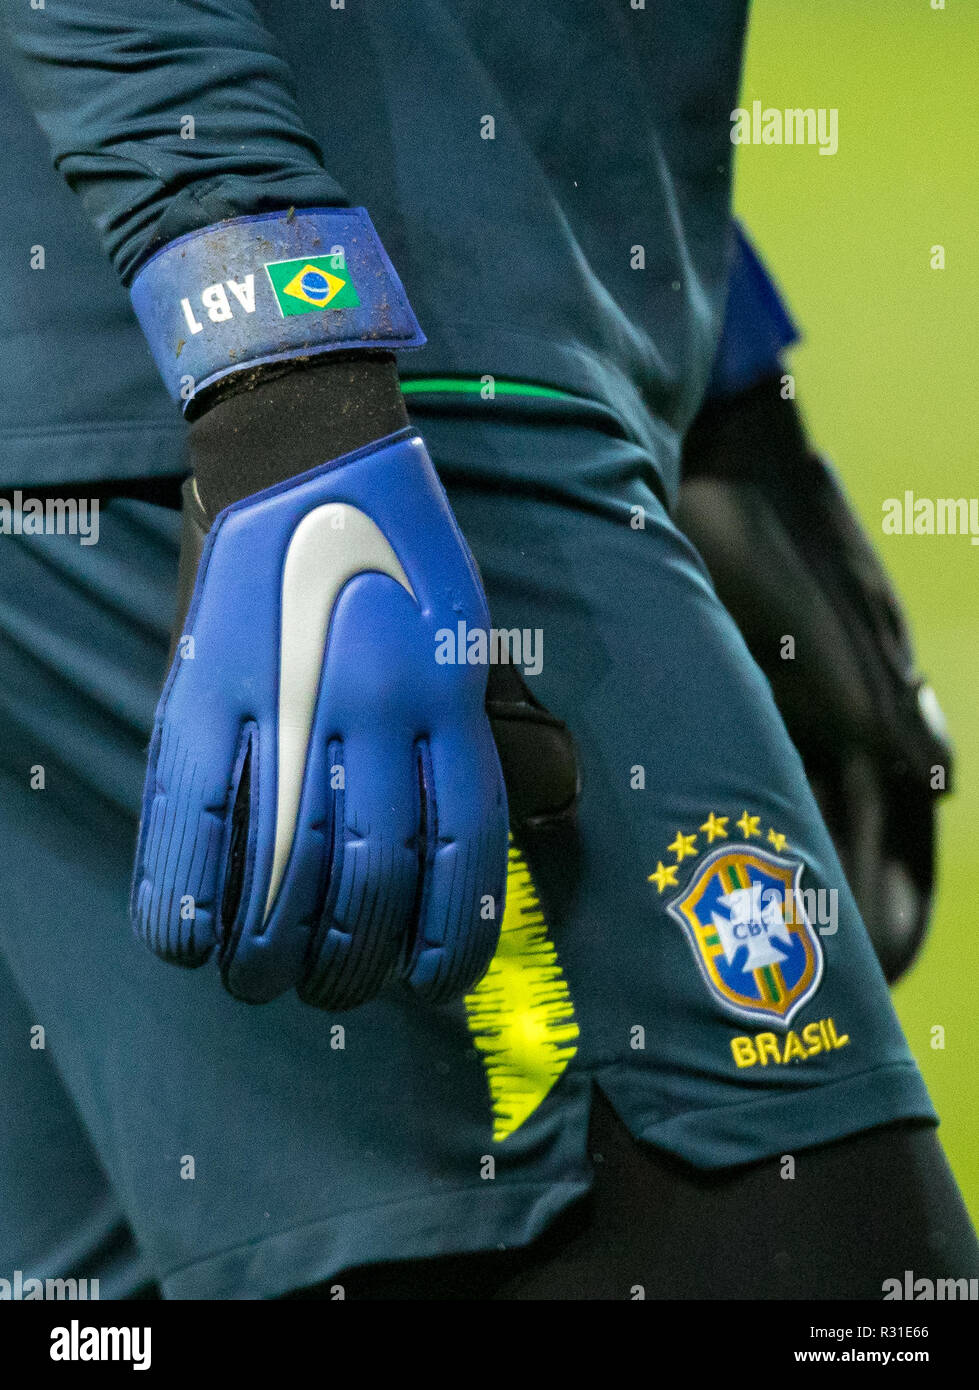 Milton Keynes, UK. 20th Nov 2018. The Nike goalkeeping gloves of Goalkeeper  Alisson (Liverpool) of Brazil displaying AB1 and Brazilian flag during the  International match between Brazil and Cameroon at stadium:mk, Milton